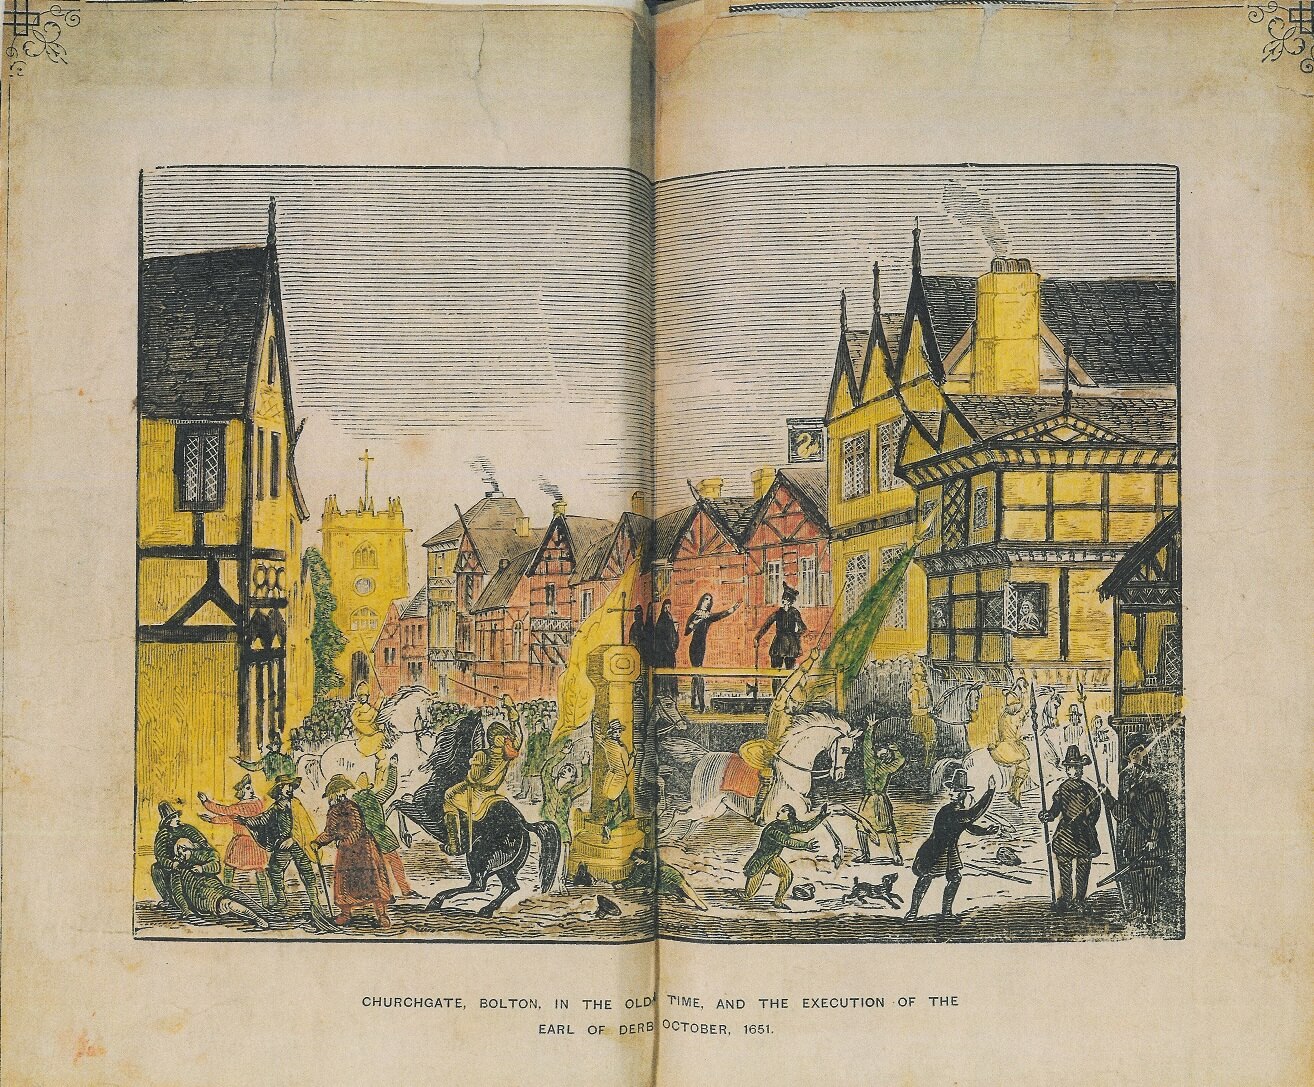 A colour depiction of the Execution of the Earl of Derby in 1651